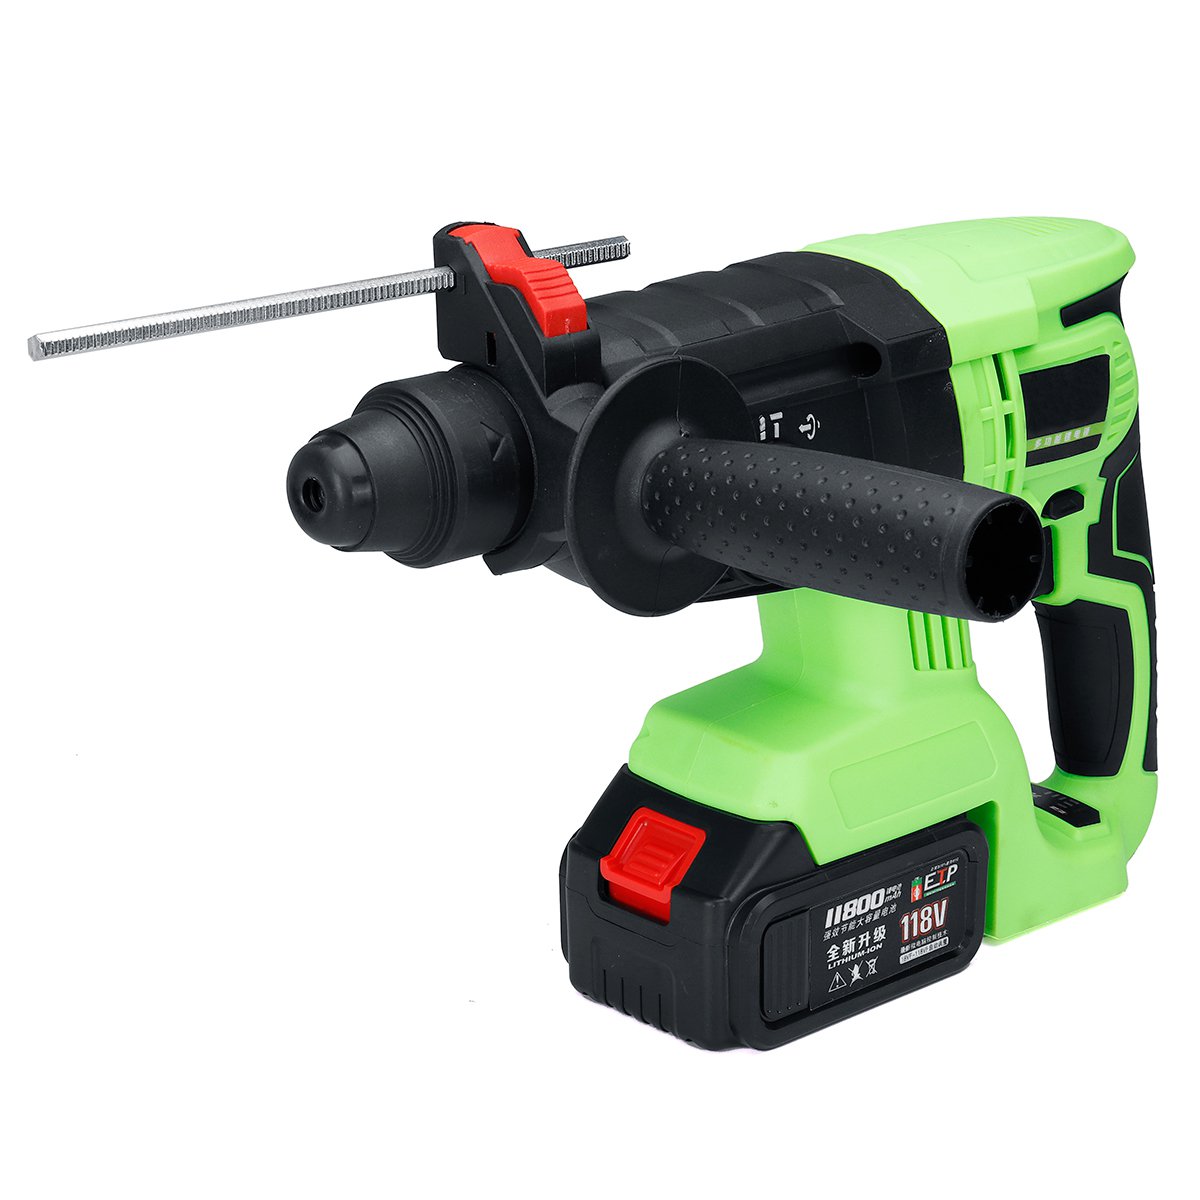 

3 In 1 Cordless Electric Hammer SDS Impact Hammer Drill 11800mAh Lithium Power Drills Drilling Powerful Tool With 2 Batteries